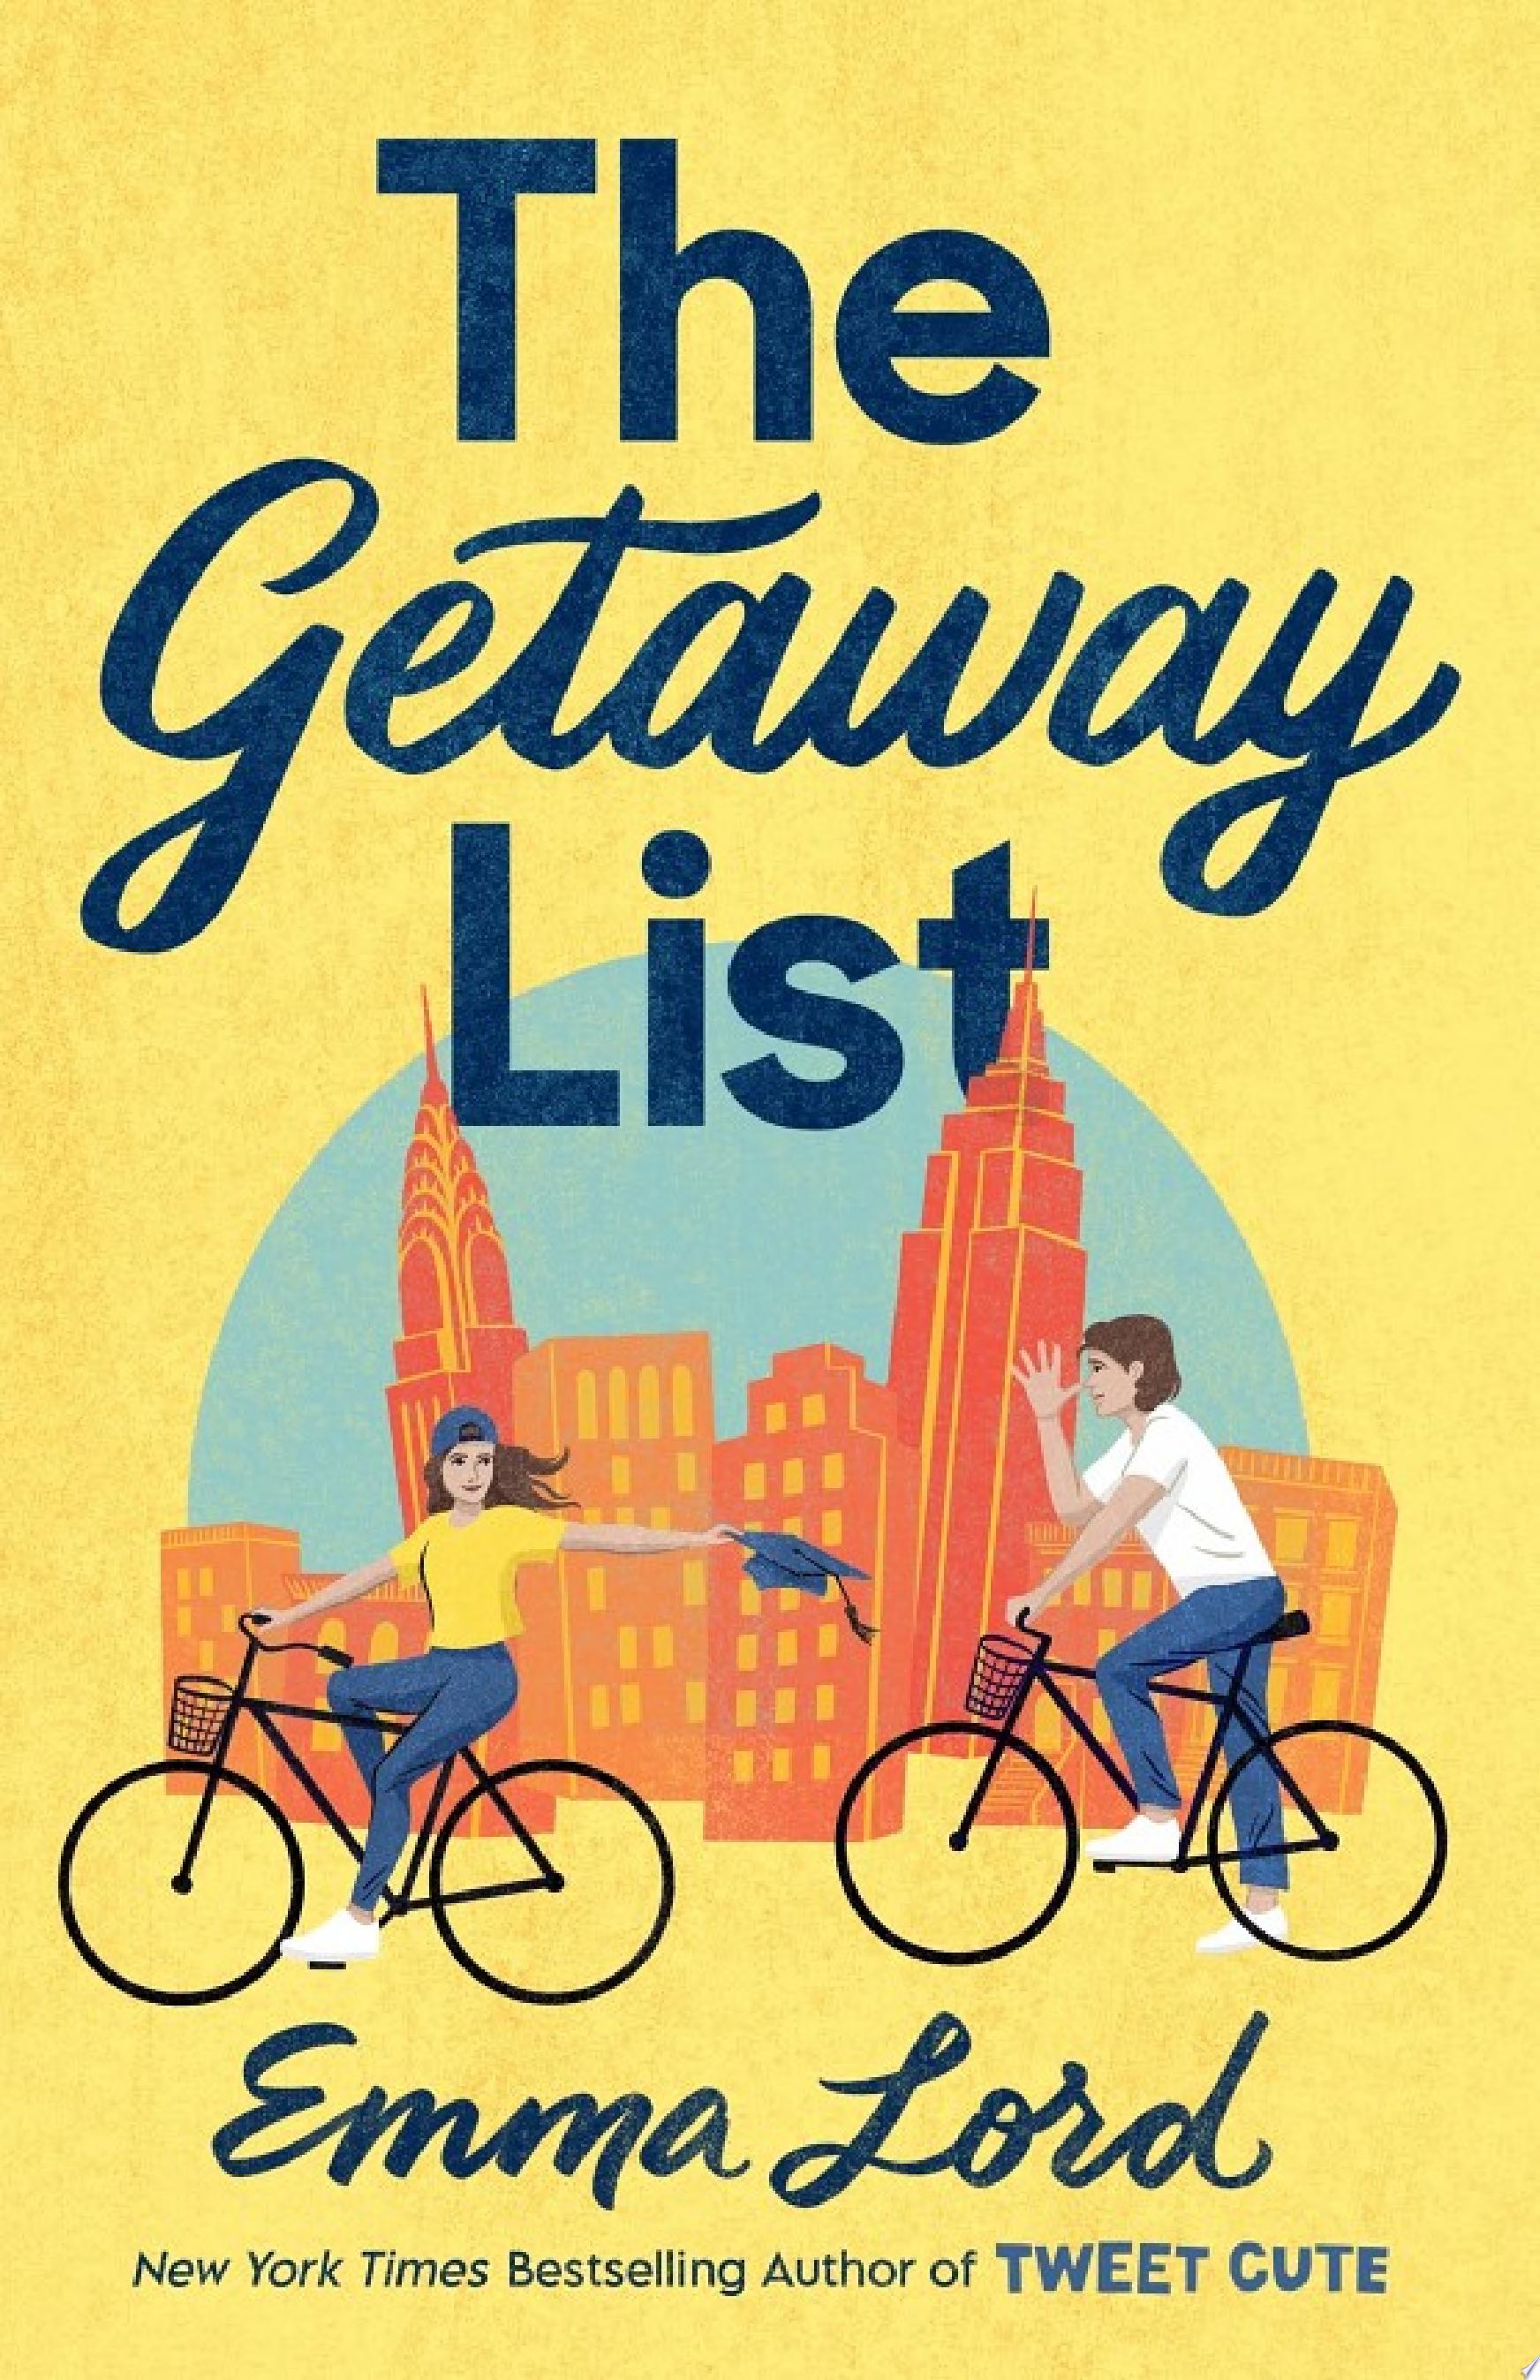 Image for "The Getaway List"